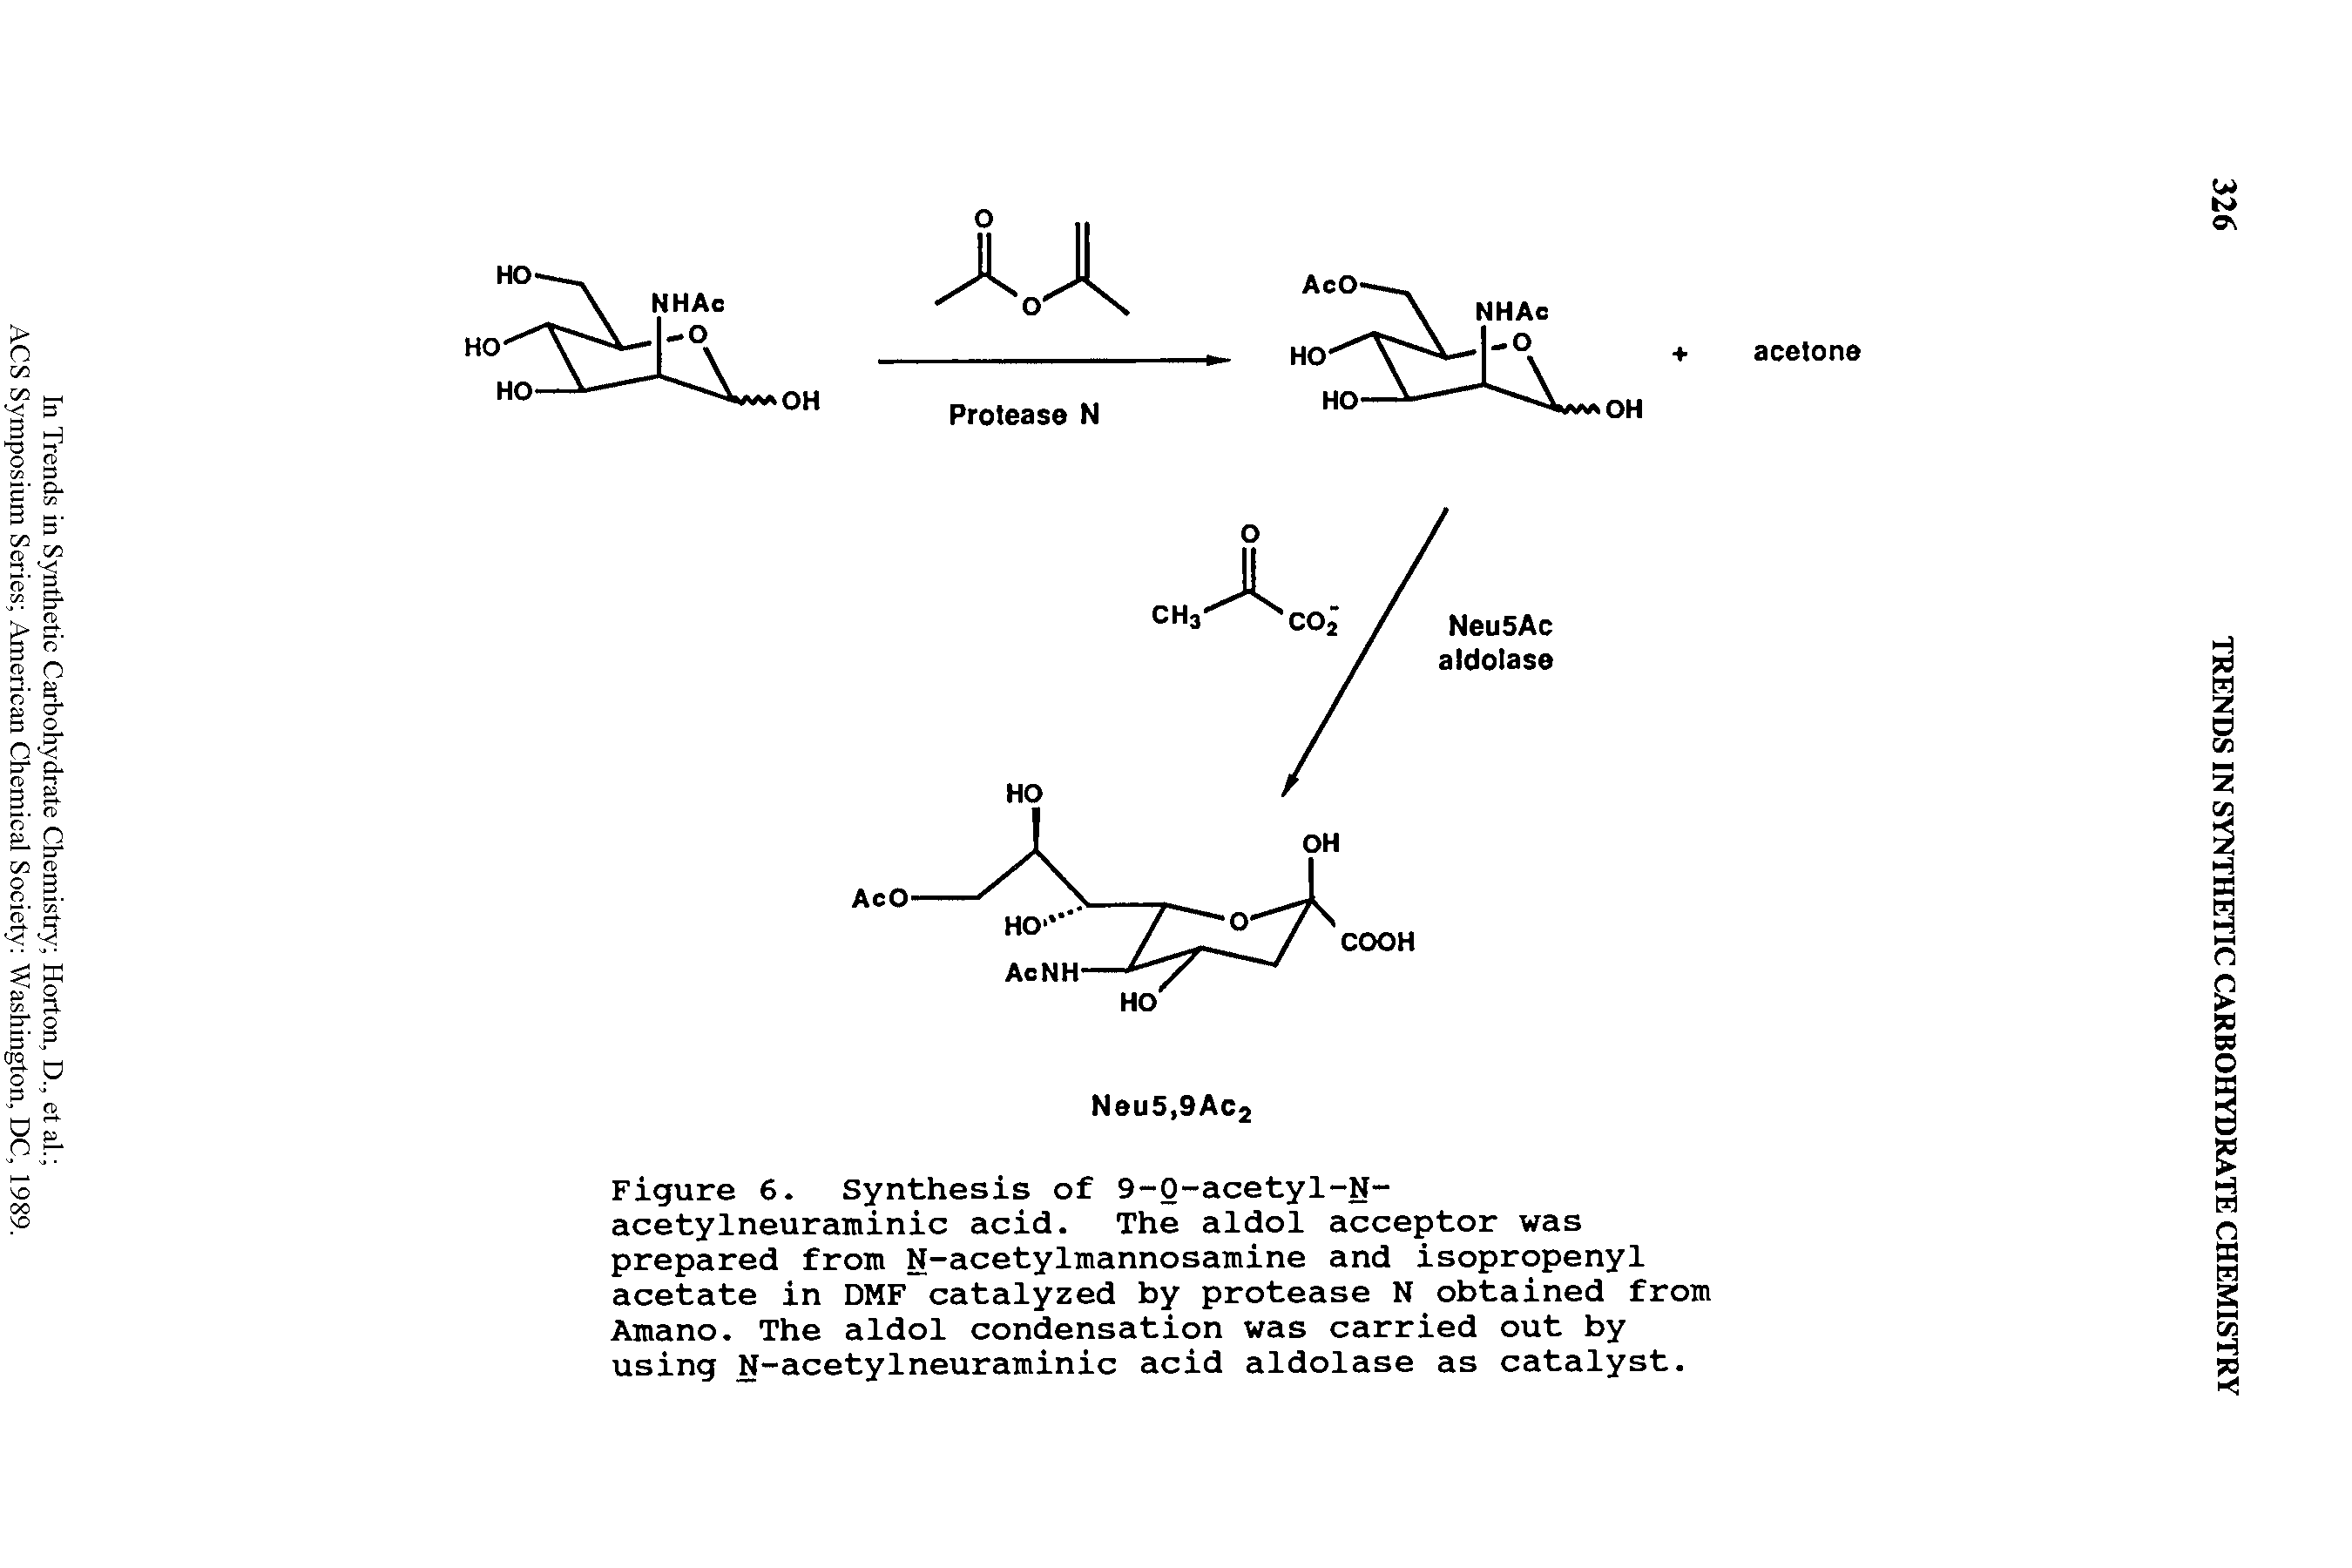 Figure 6. Synthesis of 9-0-acetyl-N-acetylneuraminic acid. The aldol acceptor was prepared from N-acetylmannosamine and isopropenyl acetate in DMF catalyzed by protease N obtained from Amano. The aldol condensation was carried out by using N-acetylneuraminic acid aldolase as catalyst.